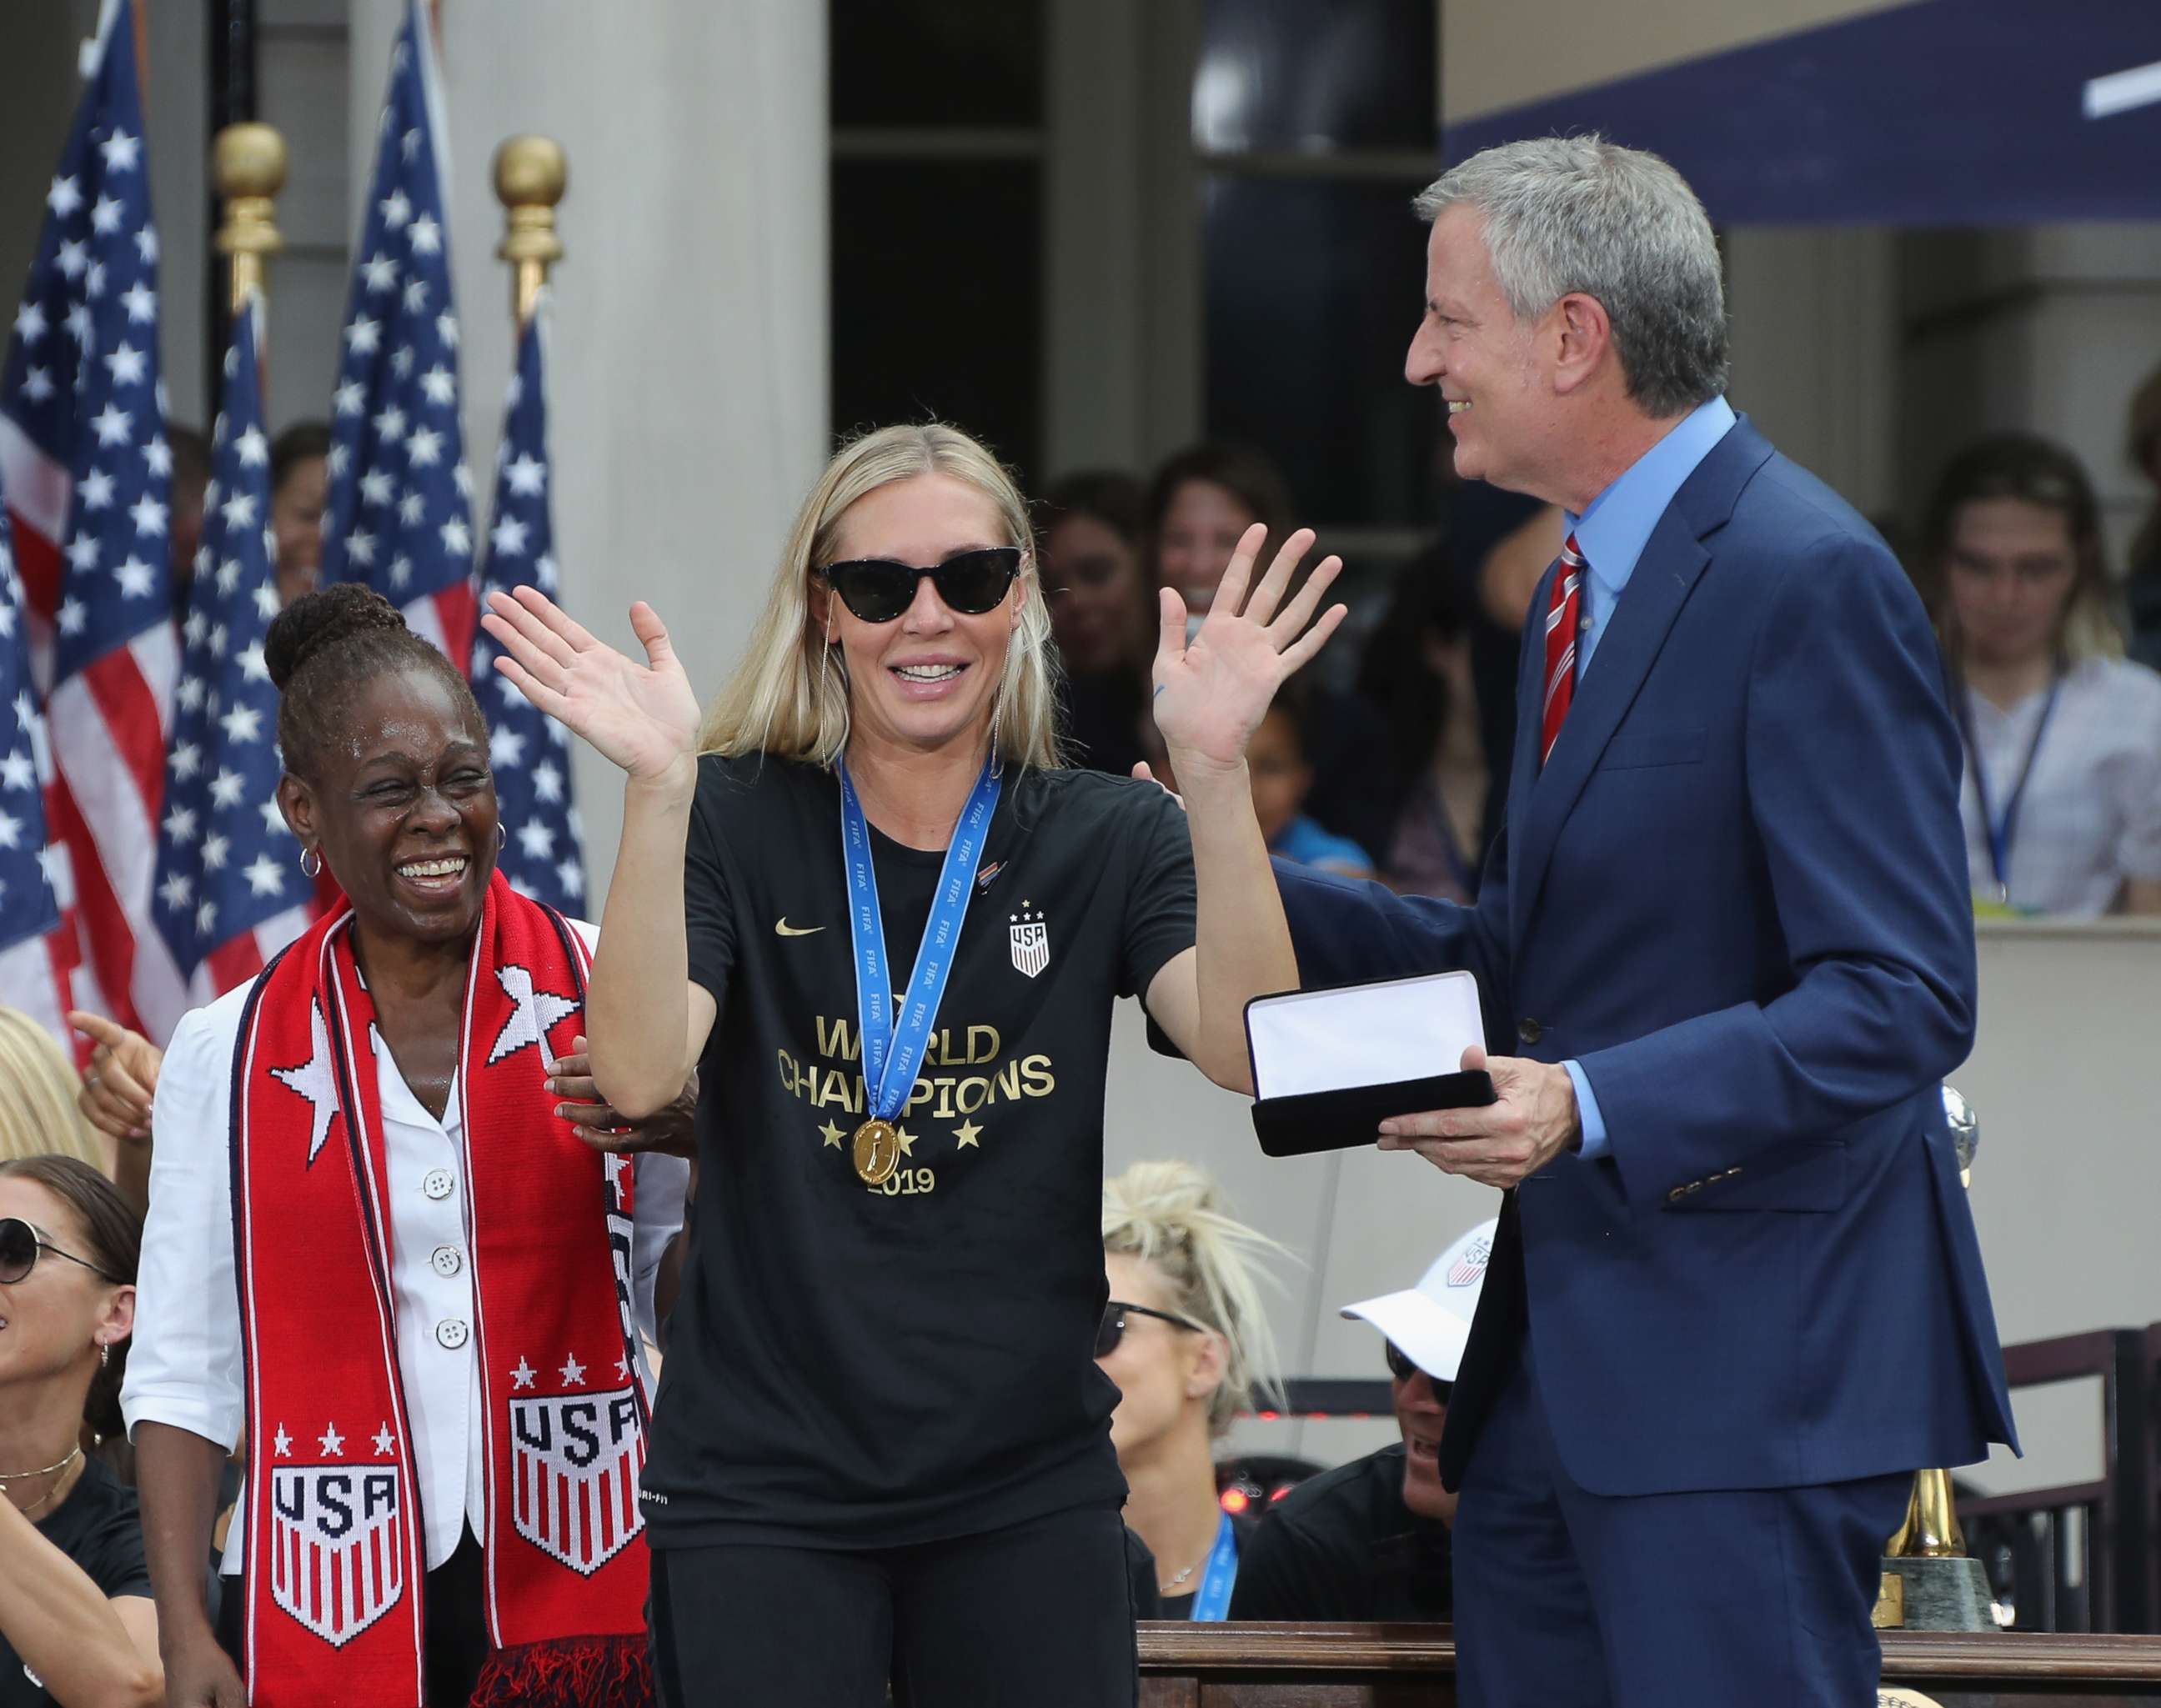 PHOTO: Allie Long of the United States Women's National Soccer Team receives the key to the city from Chirlane McCray, left, and Mayor Bill de Blasio, right, during a ceremony at City Hall on July 10, 2019 in New York City. 